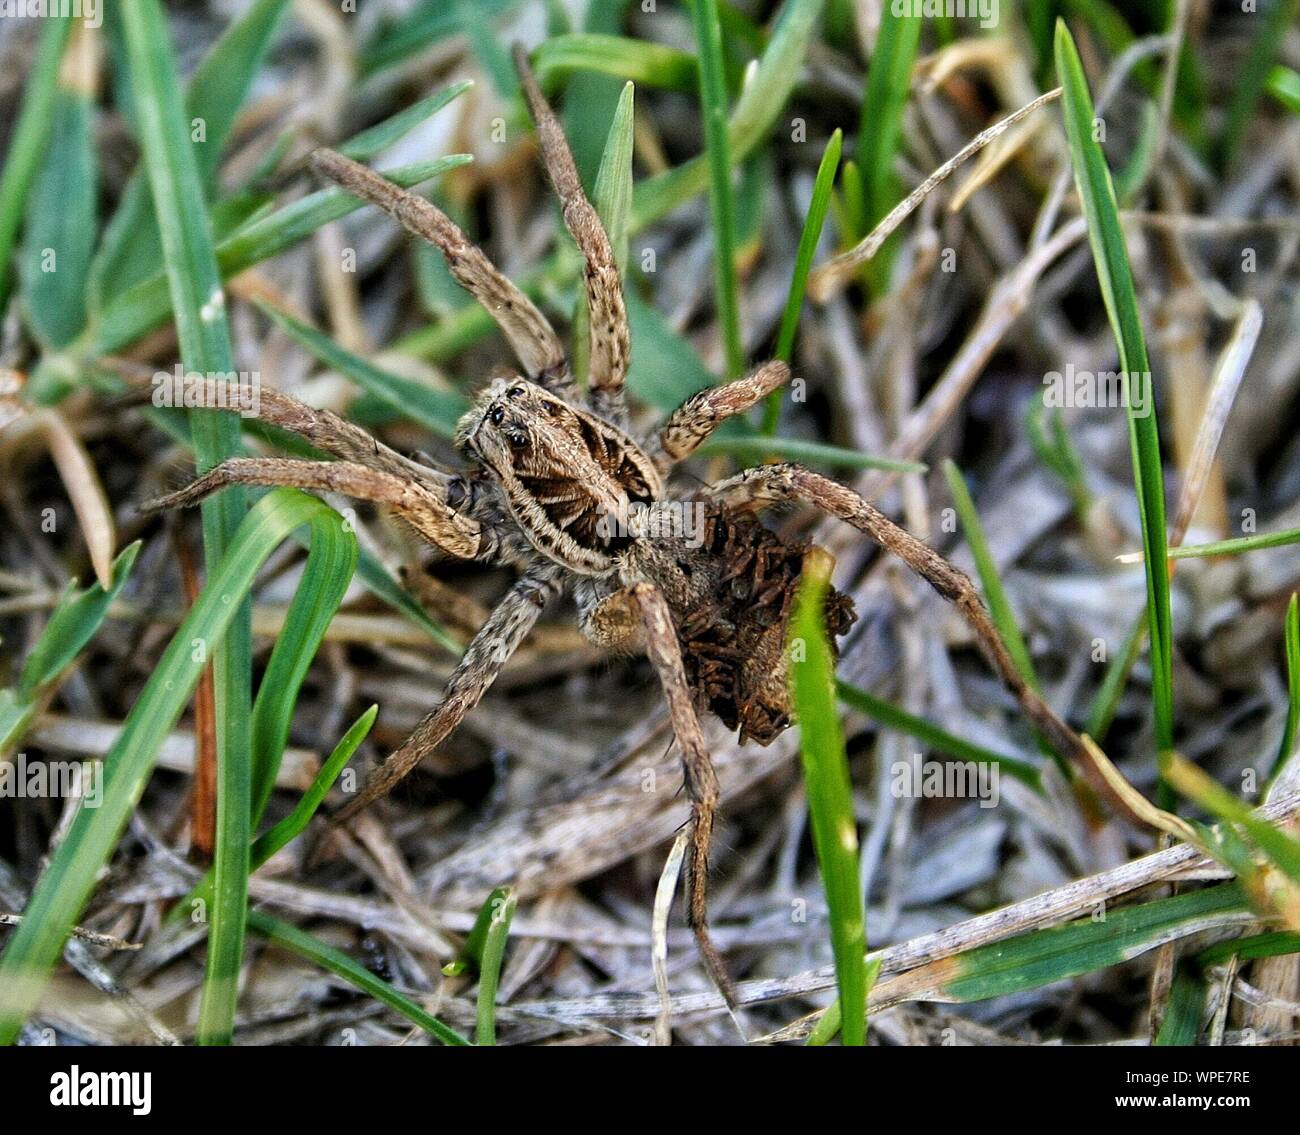 Close-up Of Spider On Grass Stock Photo